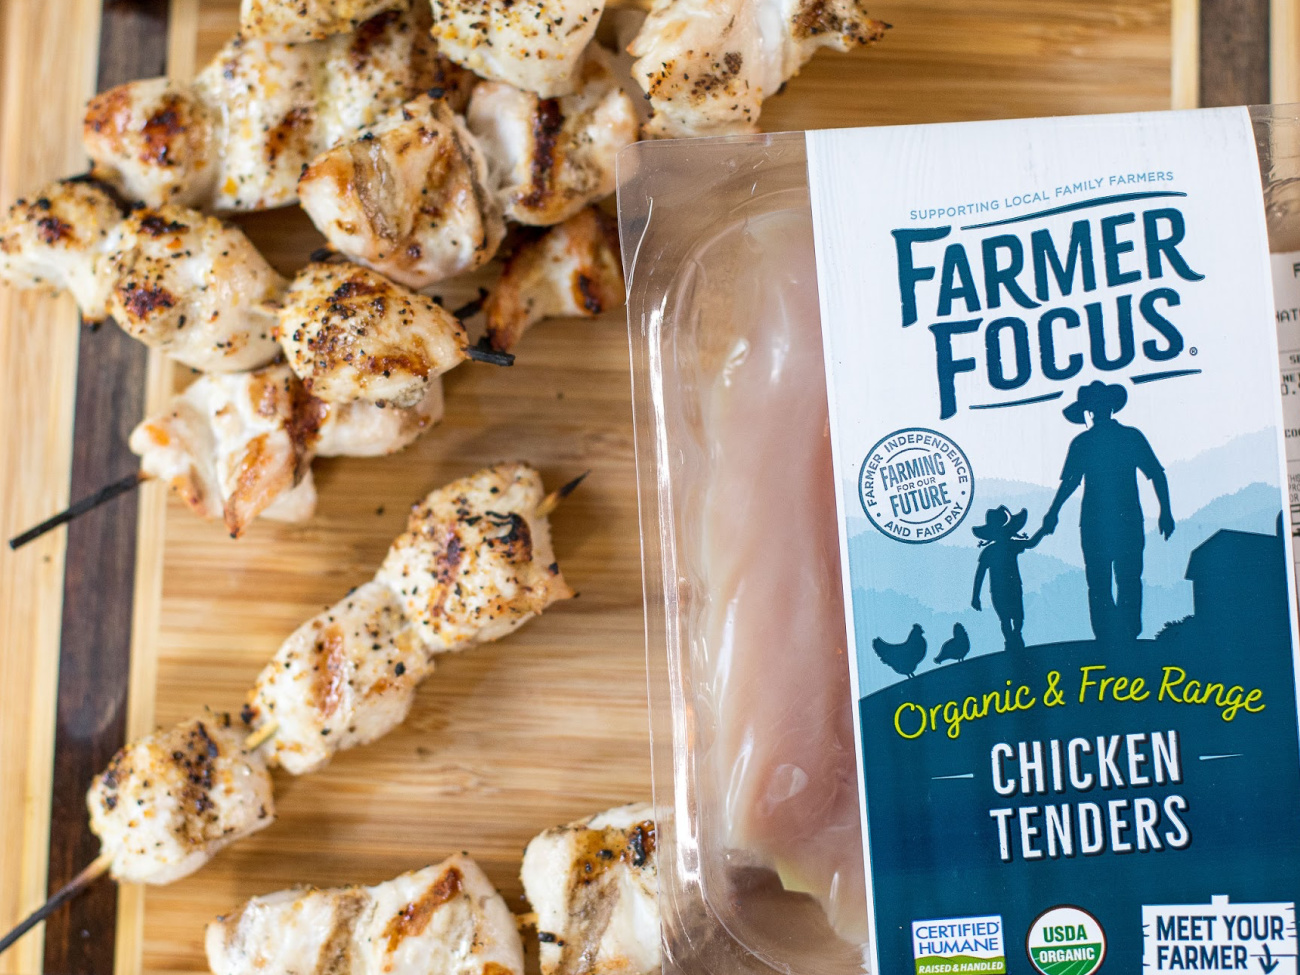 Farmer Focus Chicken Breast Is BOGO At Publix – Stock Up For Summer Grilling Season!